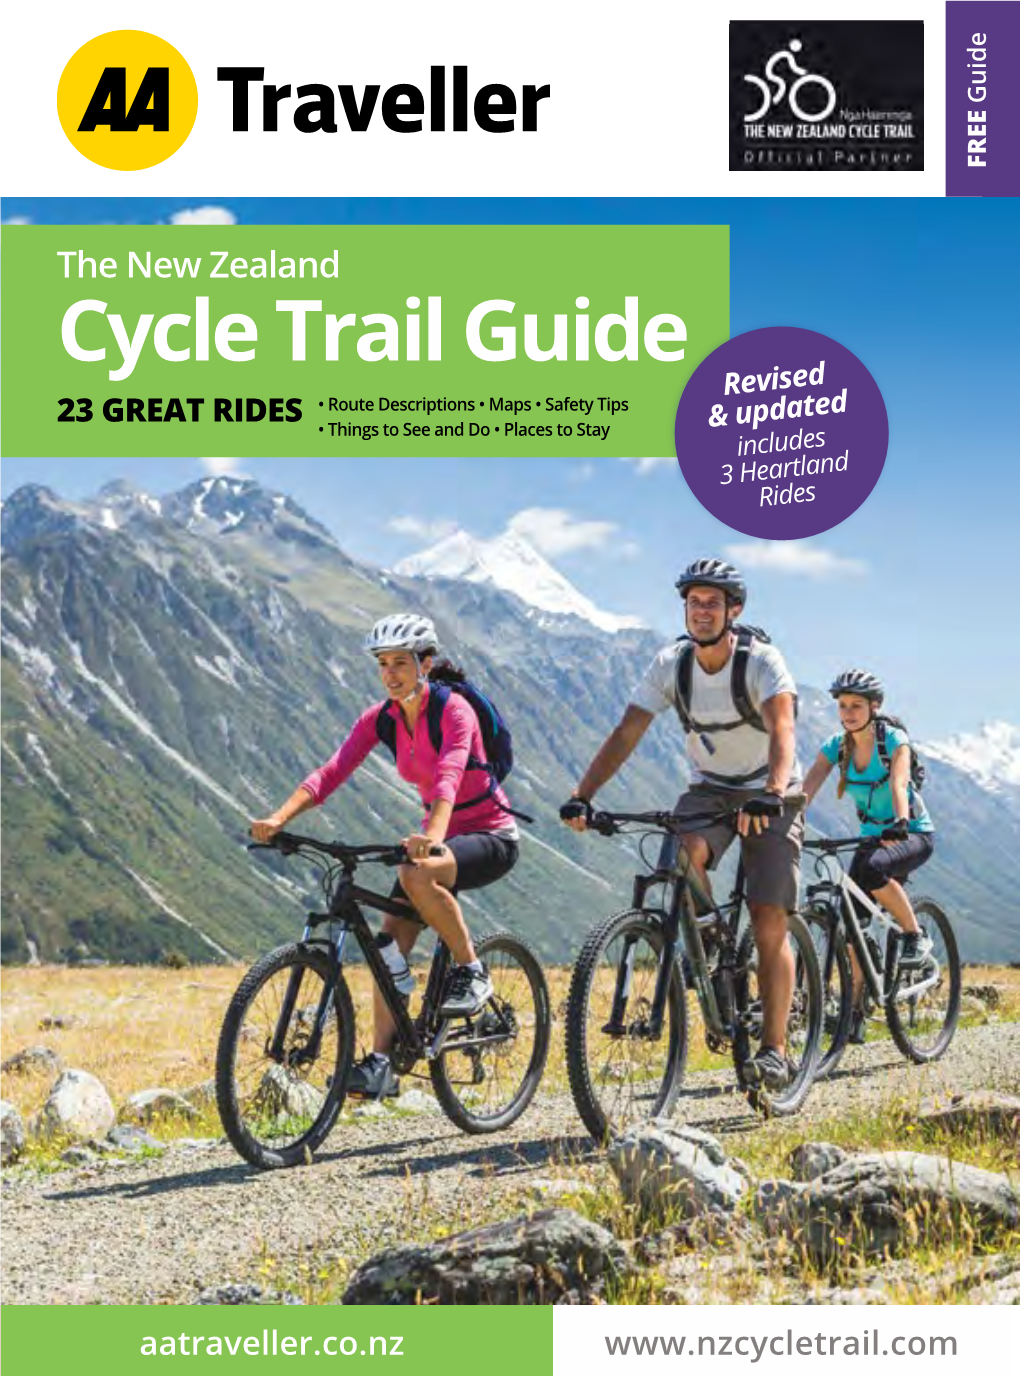 Cycle Trail Guide